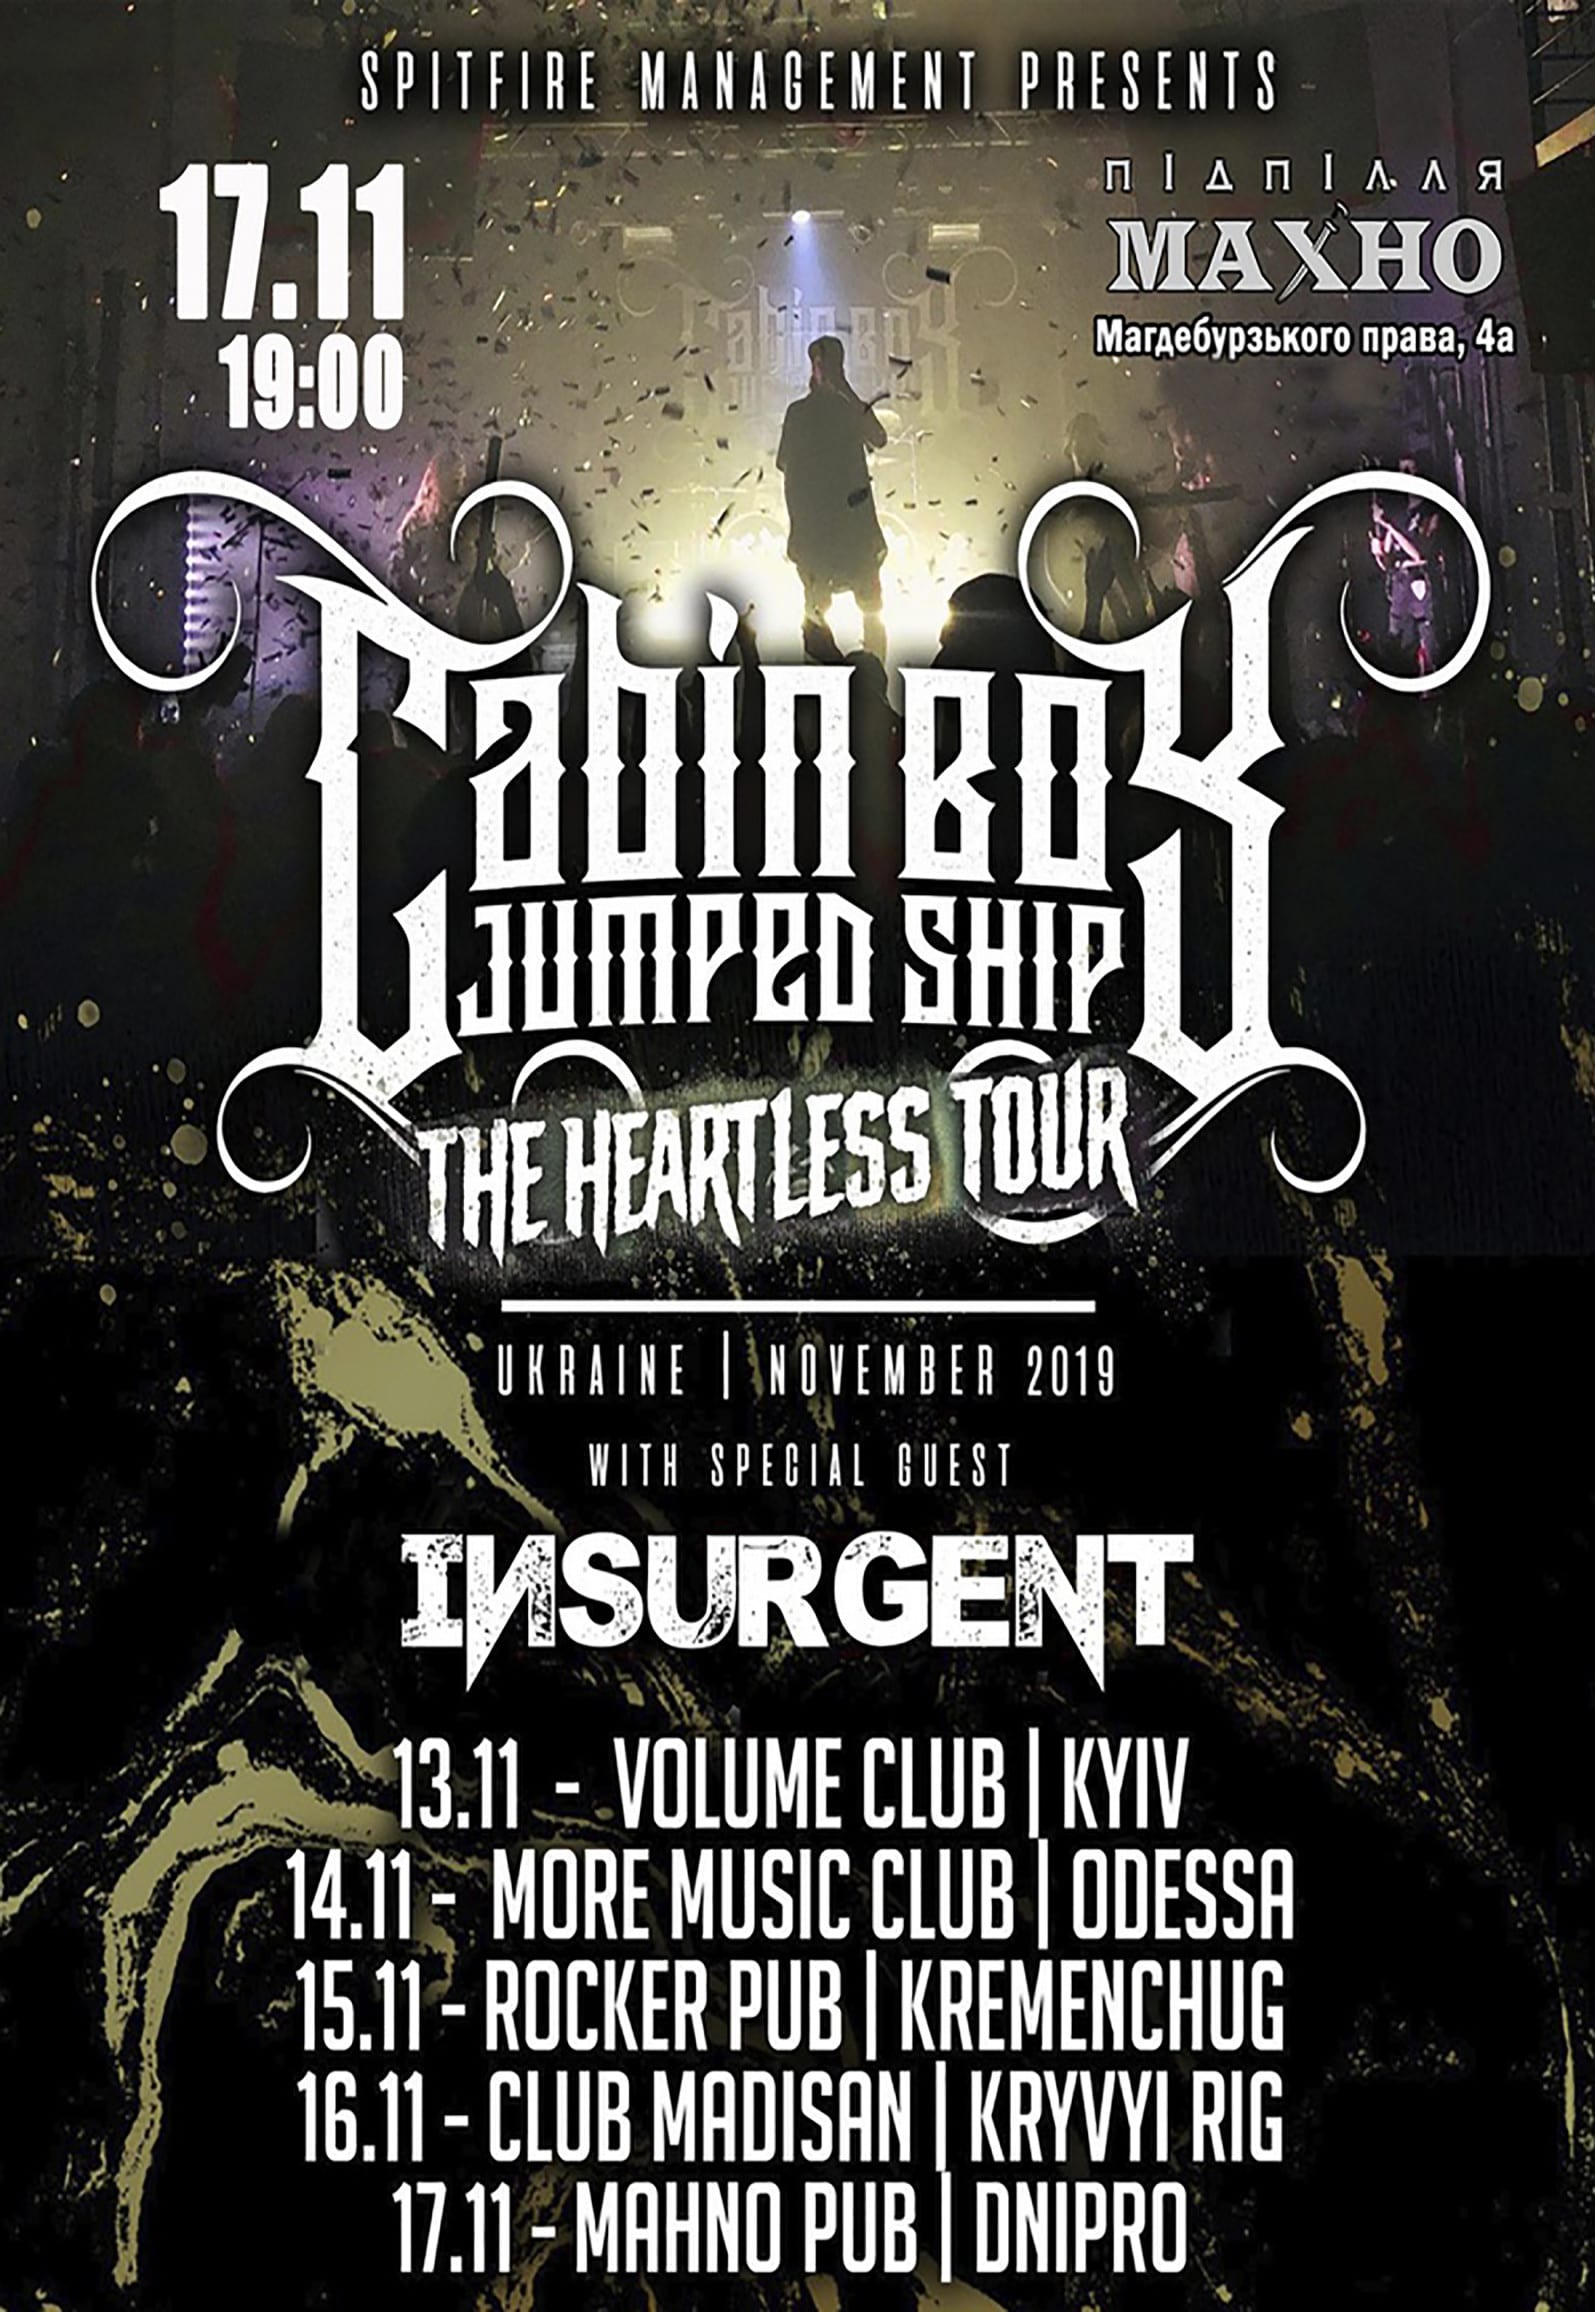 Cabin Boy Jumped Ship & Insurgent Днепр, 17.11.2019. Афиша Днепра